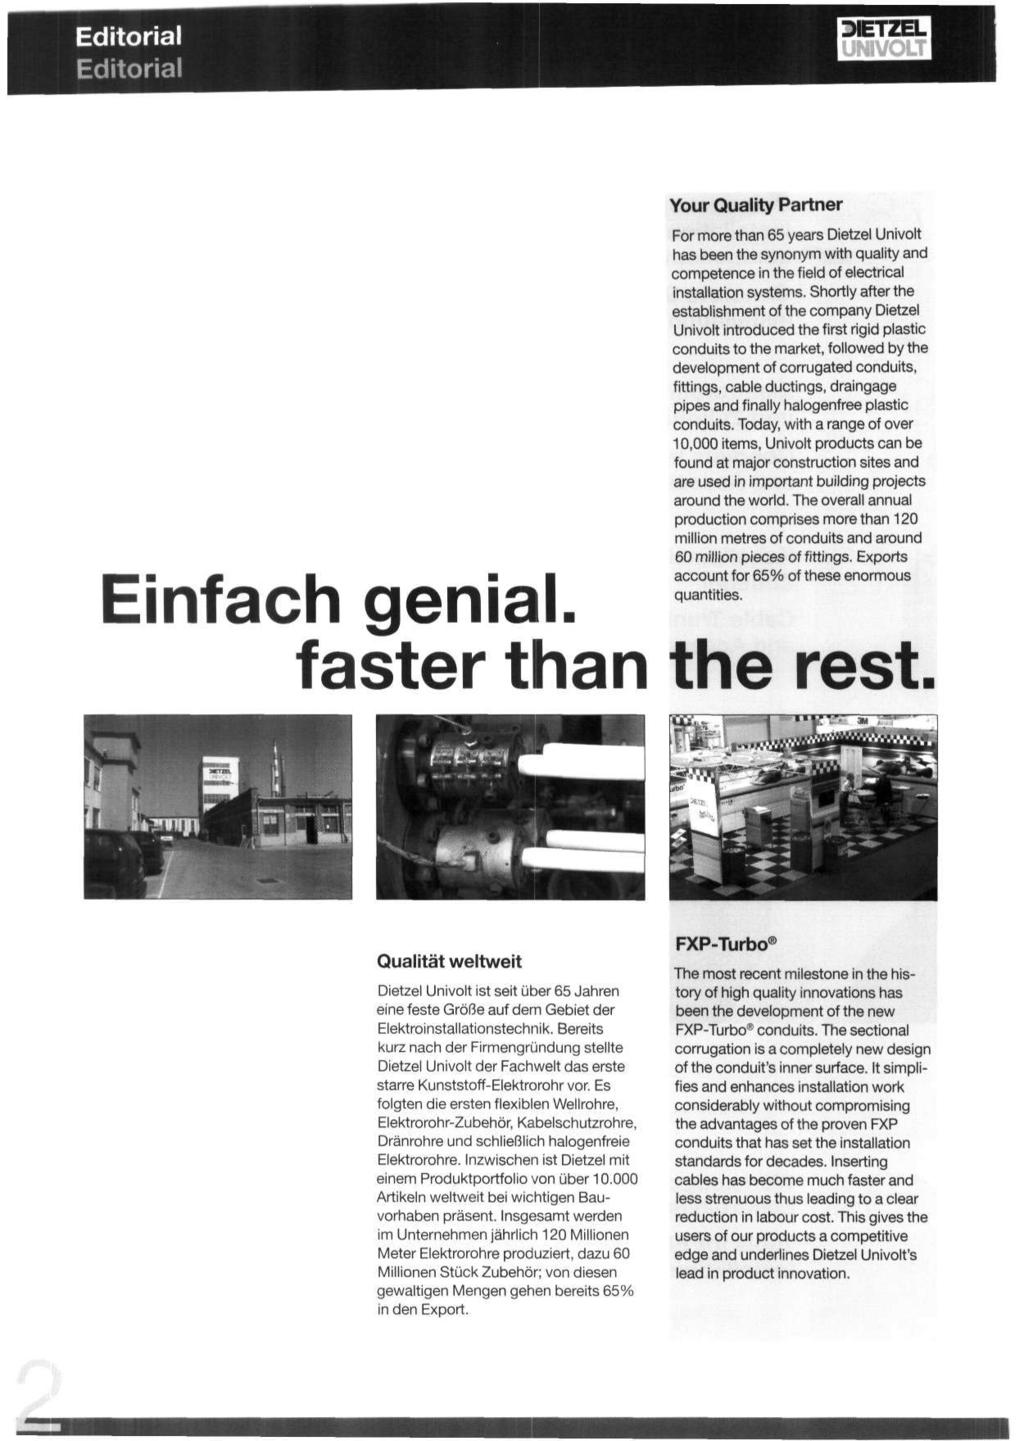 Editorial Editorial Einfach genial. Your Quality Partner For more than 65 years Dietzel Univolt has been the synonym with quality and competence in the field of electrical installation systems.